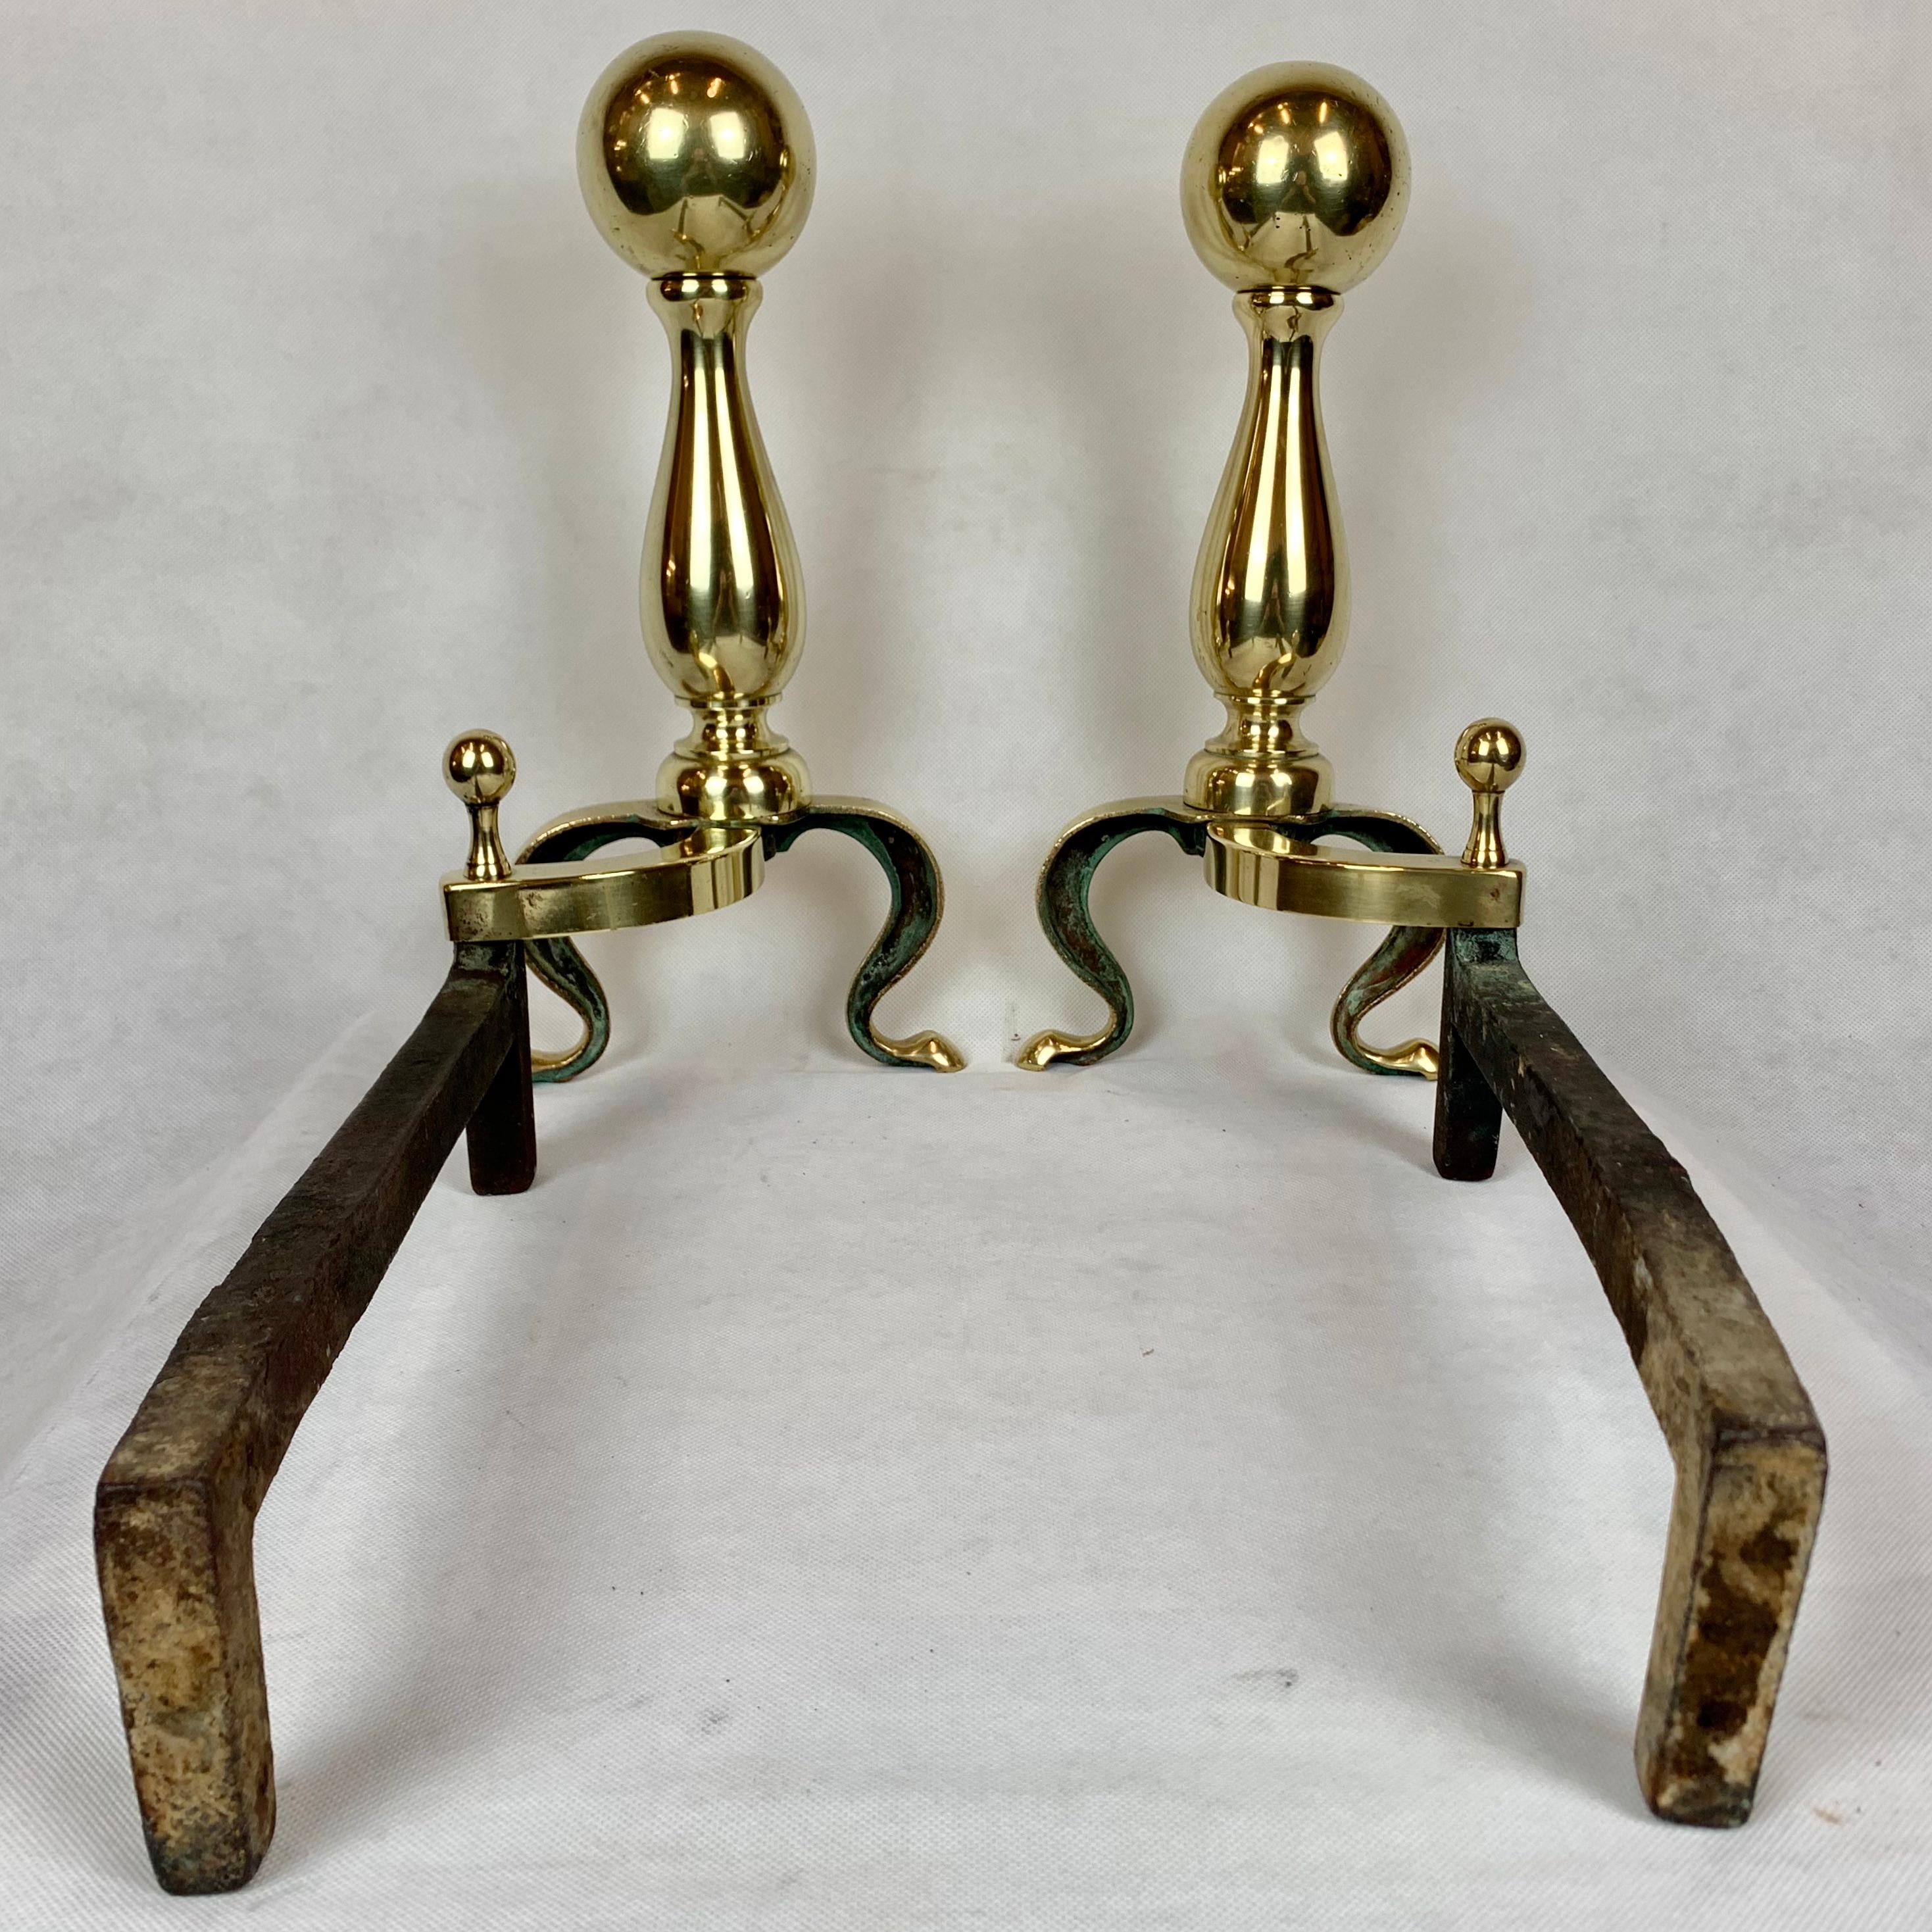 American Colonial Pair of Brass Ball Top Andirons-Foundry Mark of B. A.  Co., Boston